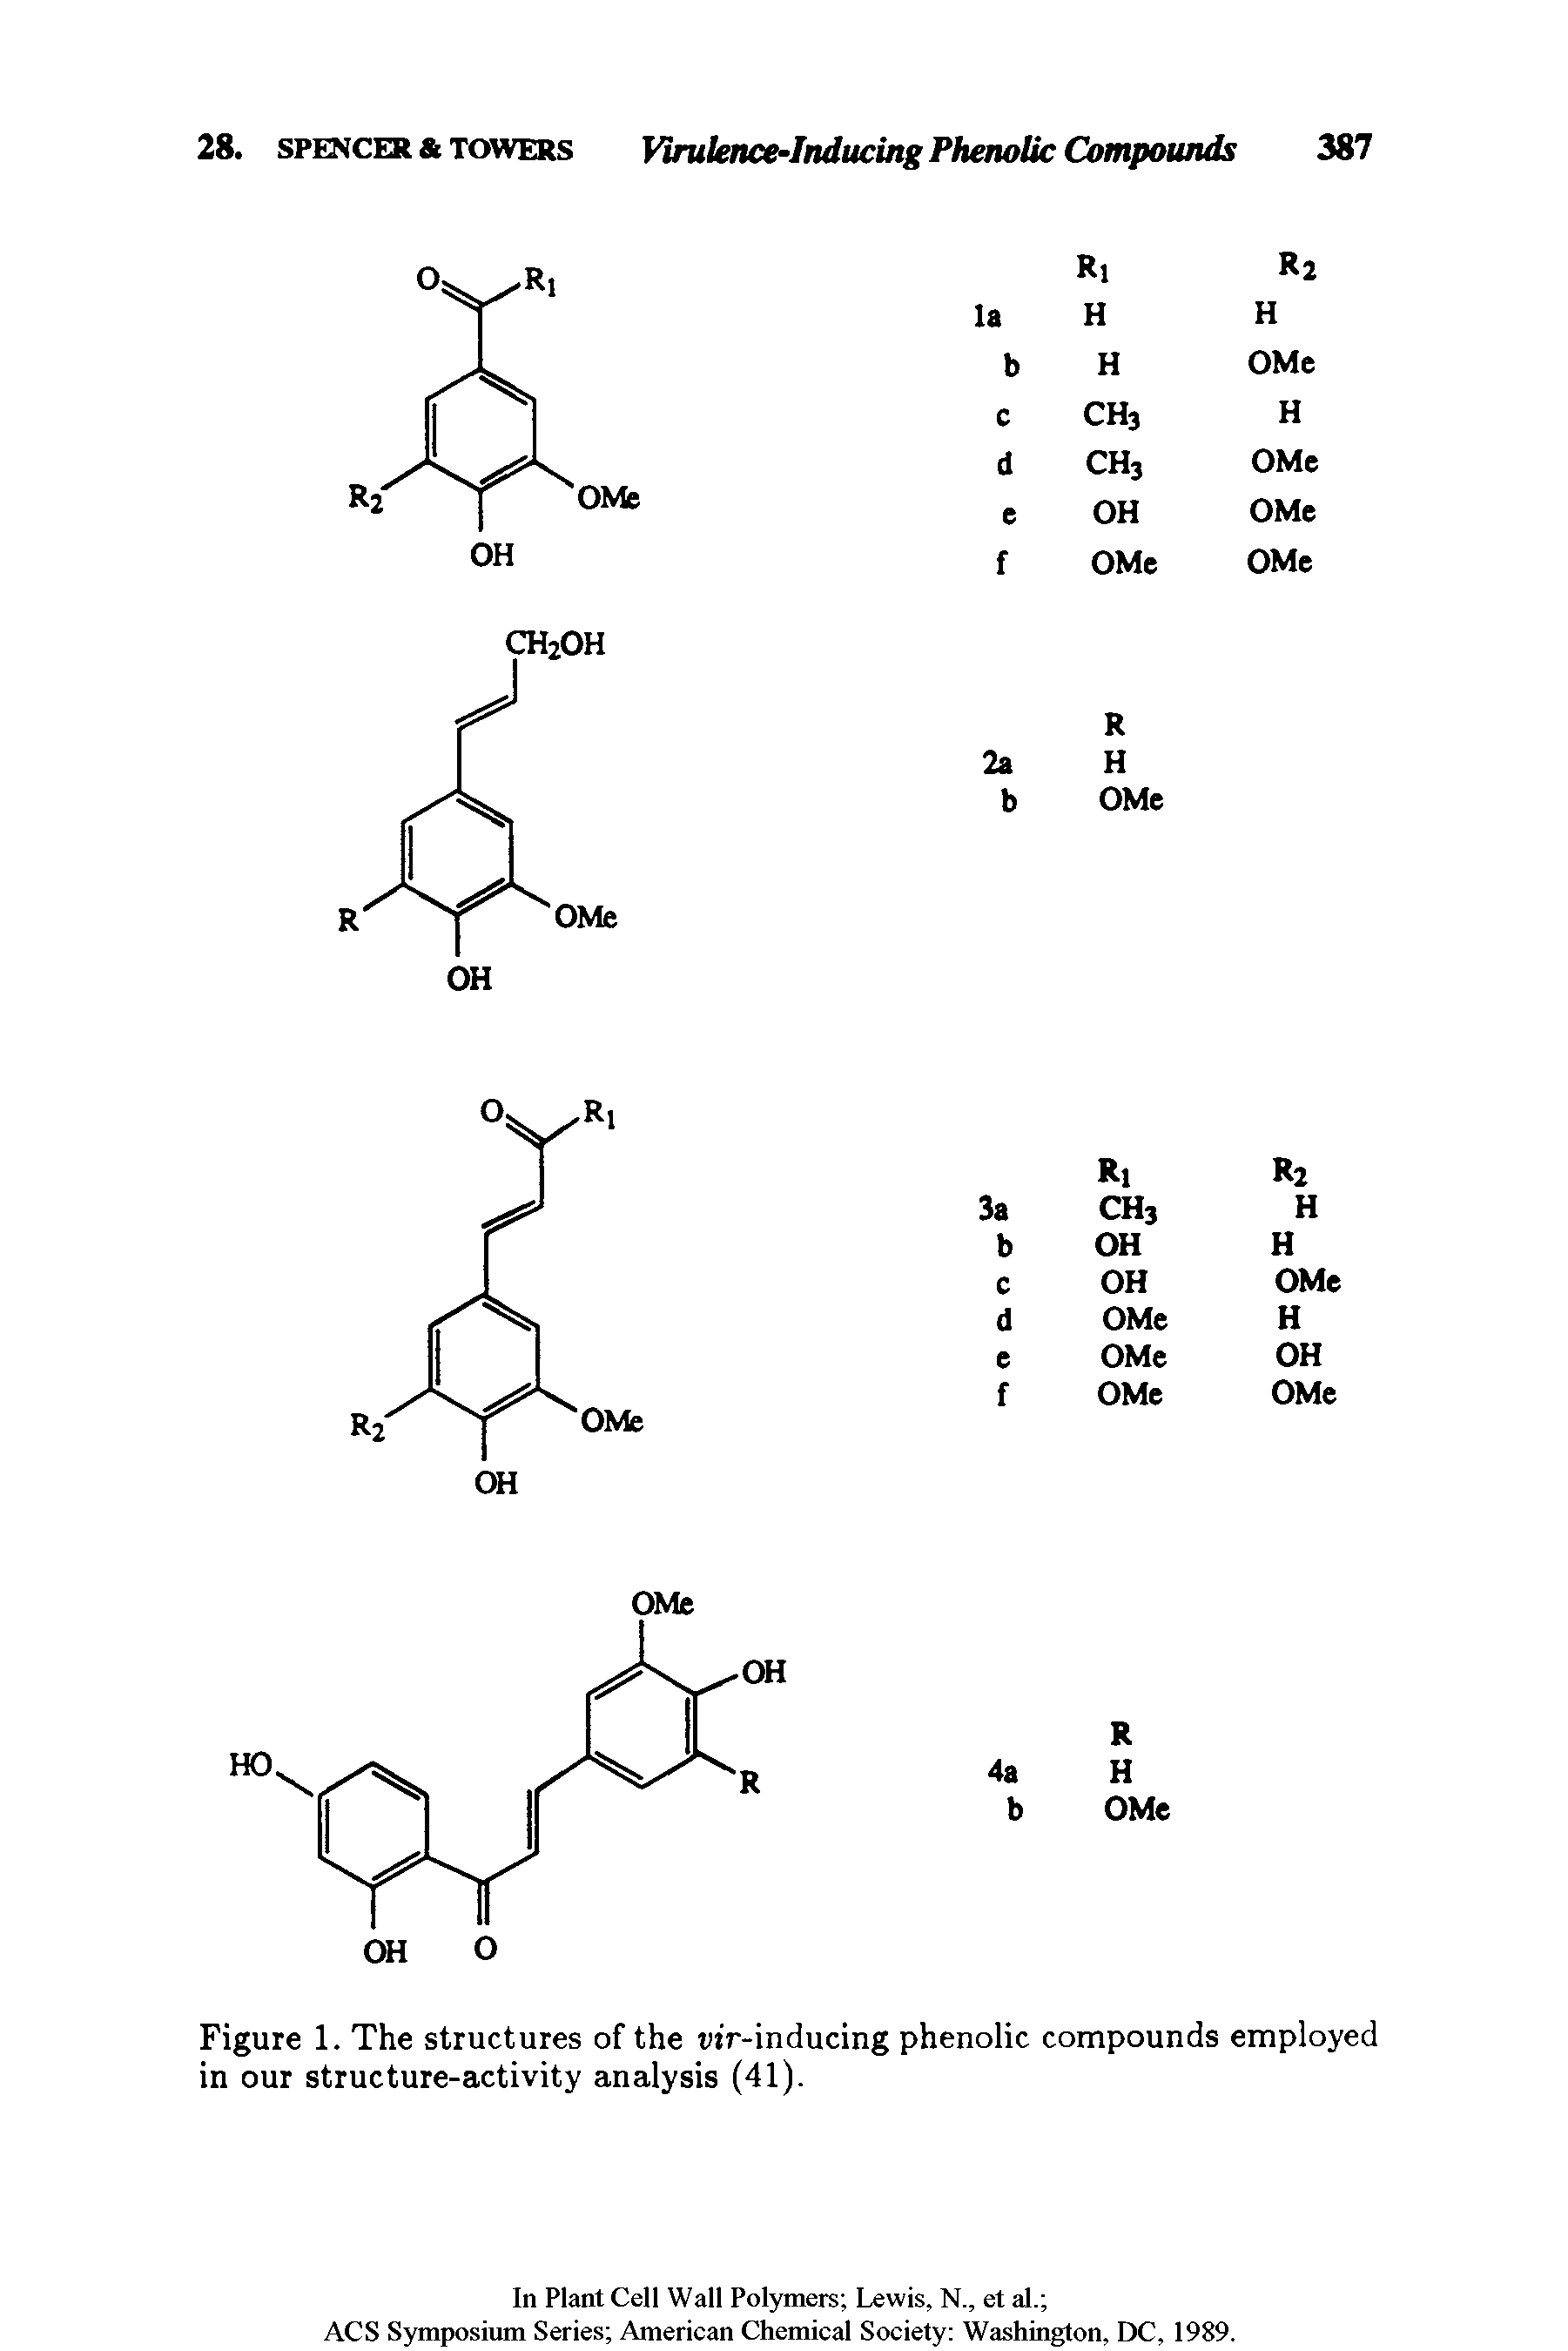 Figure 1. The structures of the uir-inducing phenolic compounds employed in our structure-activity analysis (41).